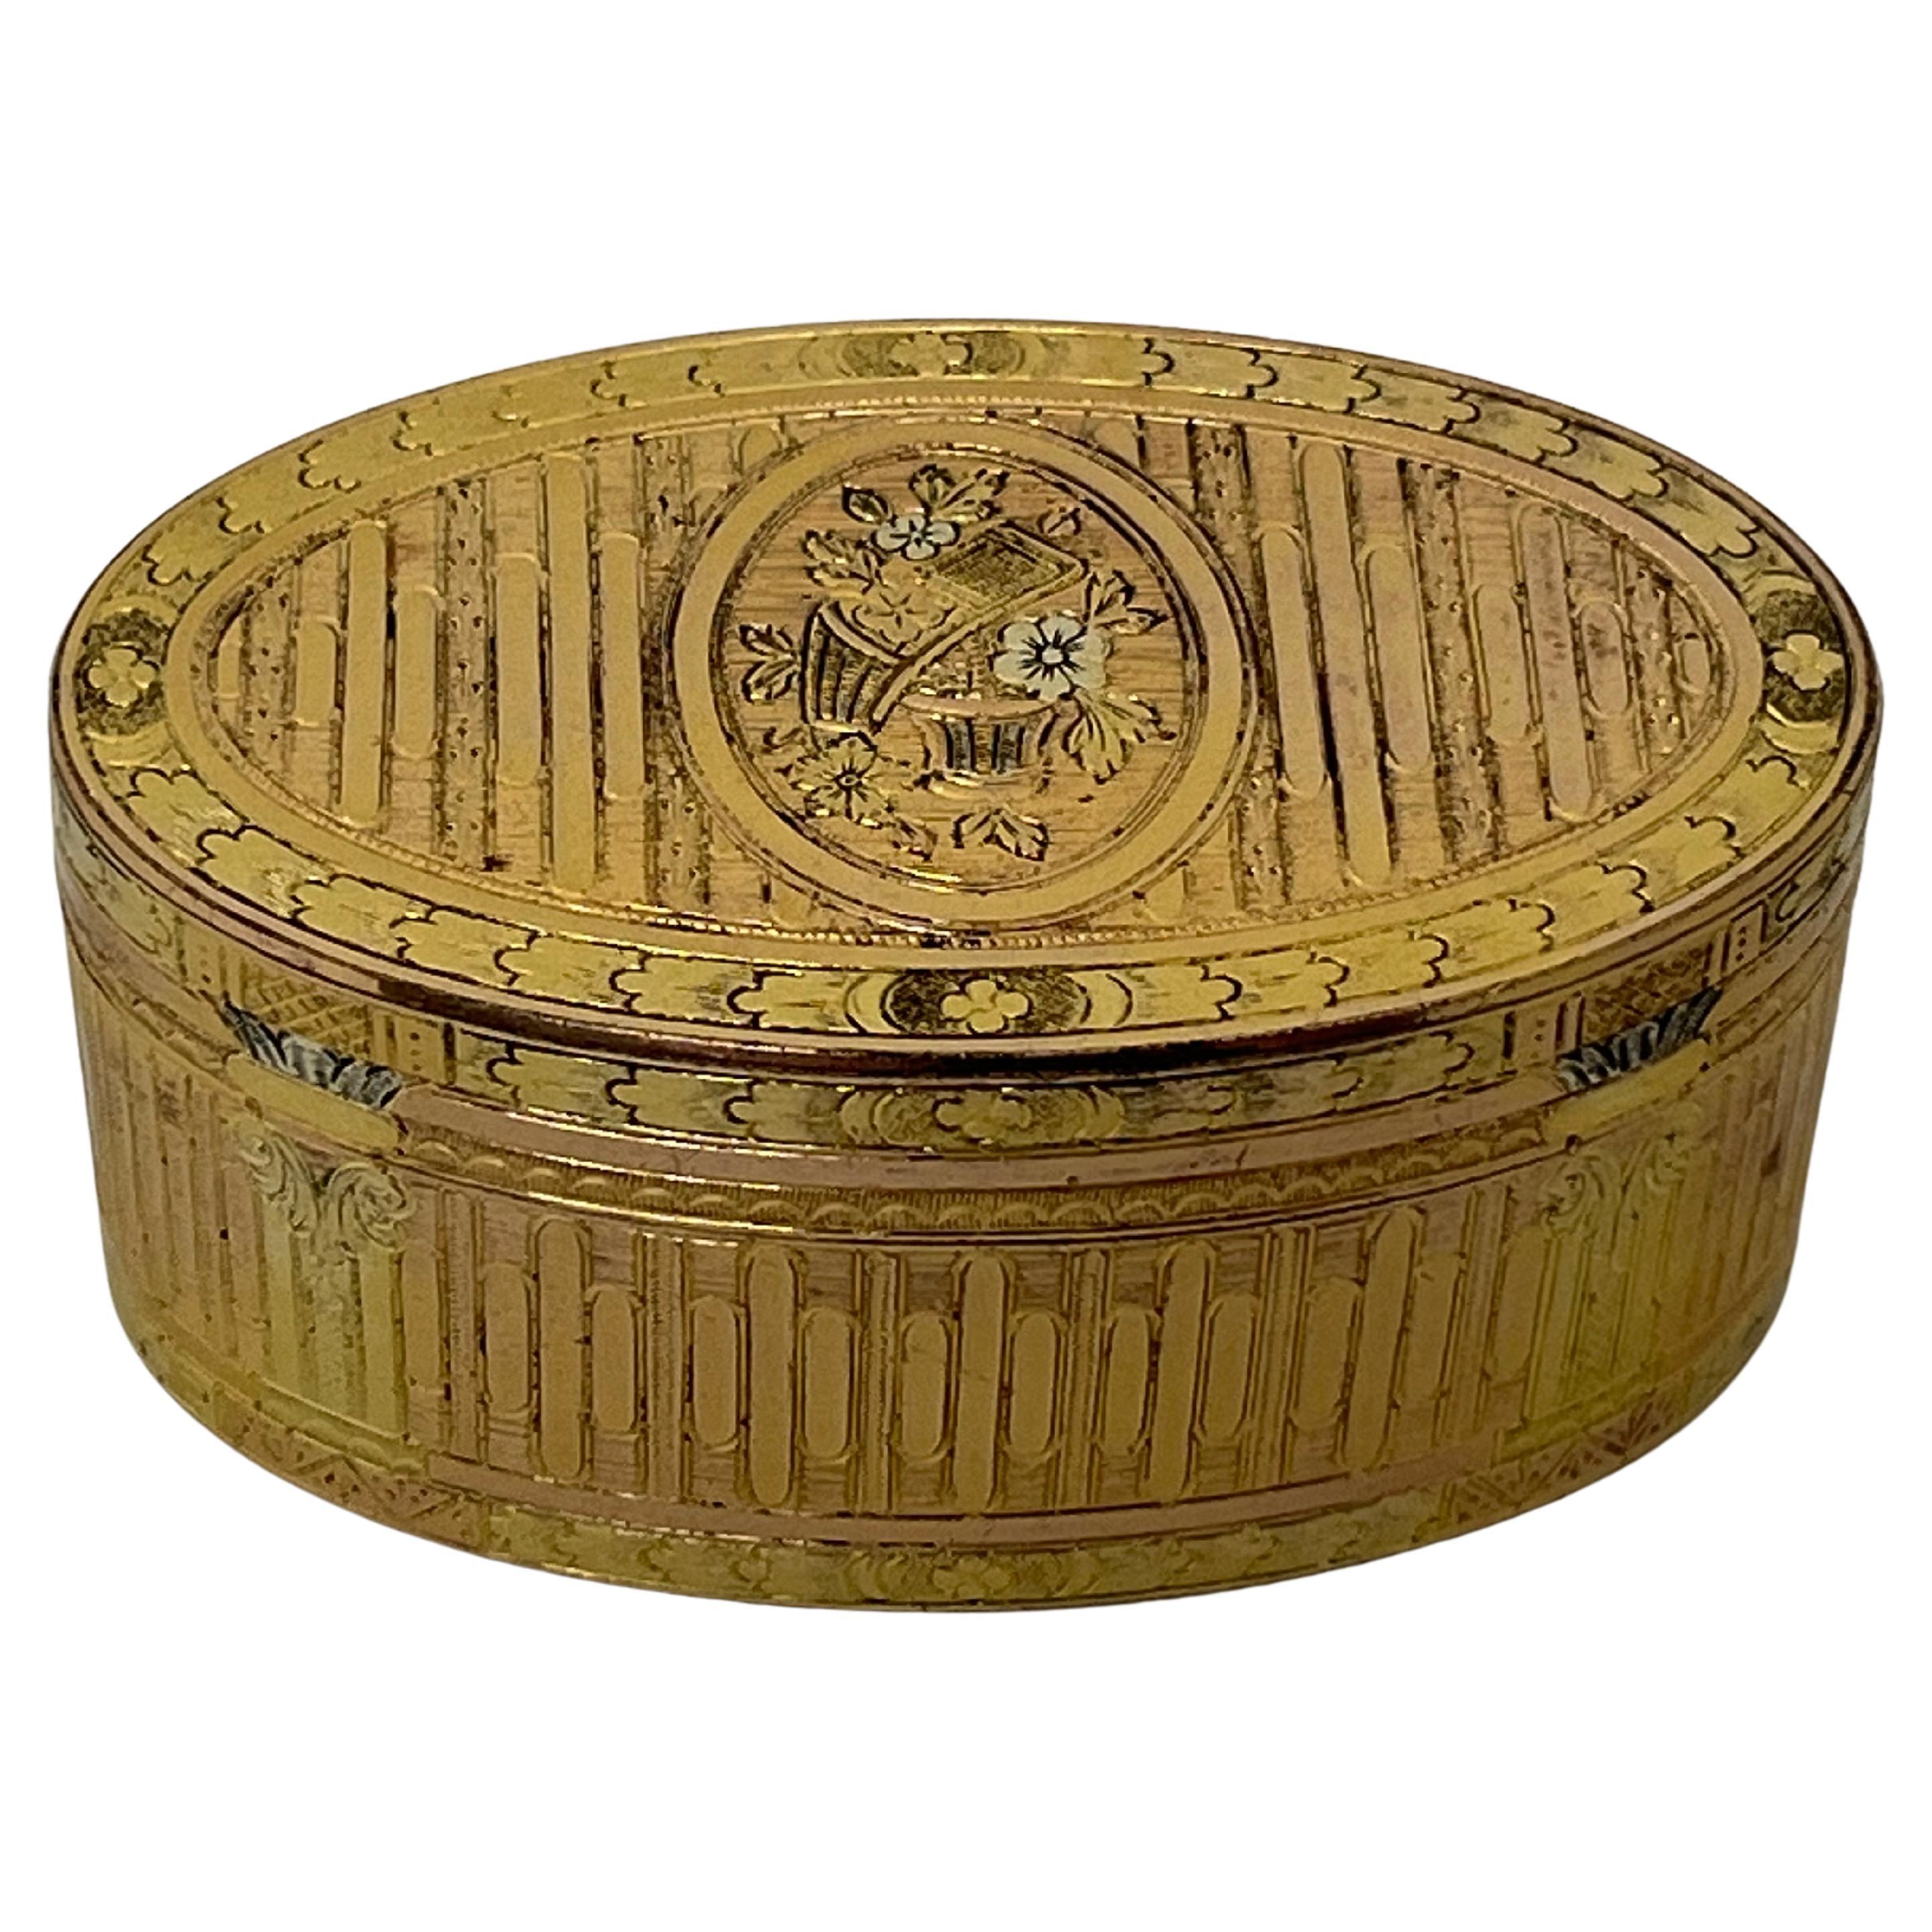 French Eighteenth-century silver-gilt snuff box, of outstanding quality, oval form with varicoloured gilding, the top cover and base with central oval vignette depicting baskets and flowers. With yellow coloured gilding to the body, contrasting with